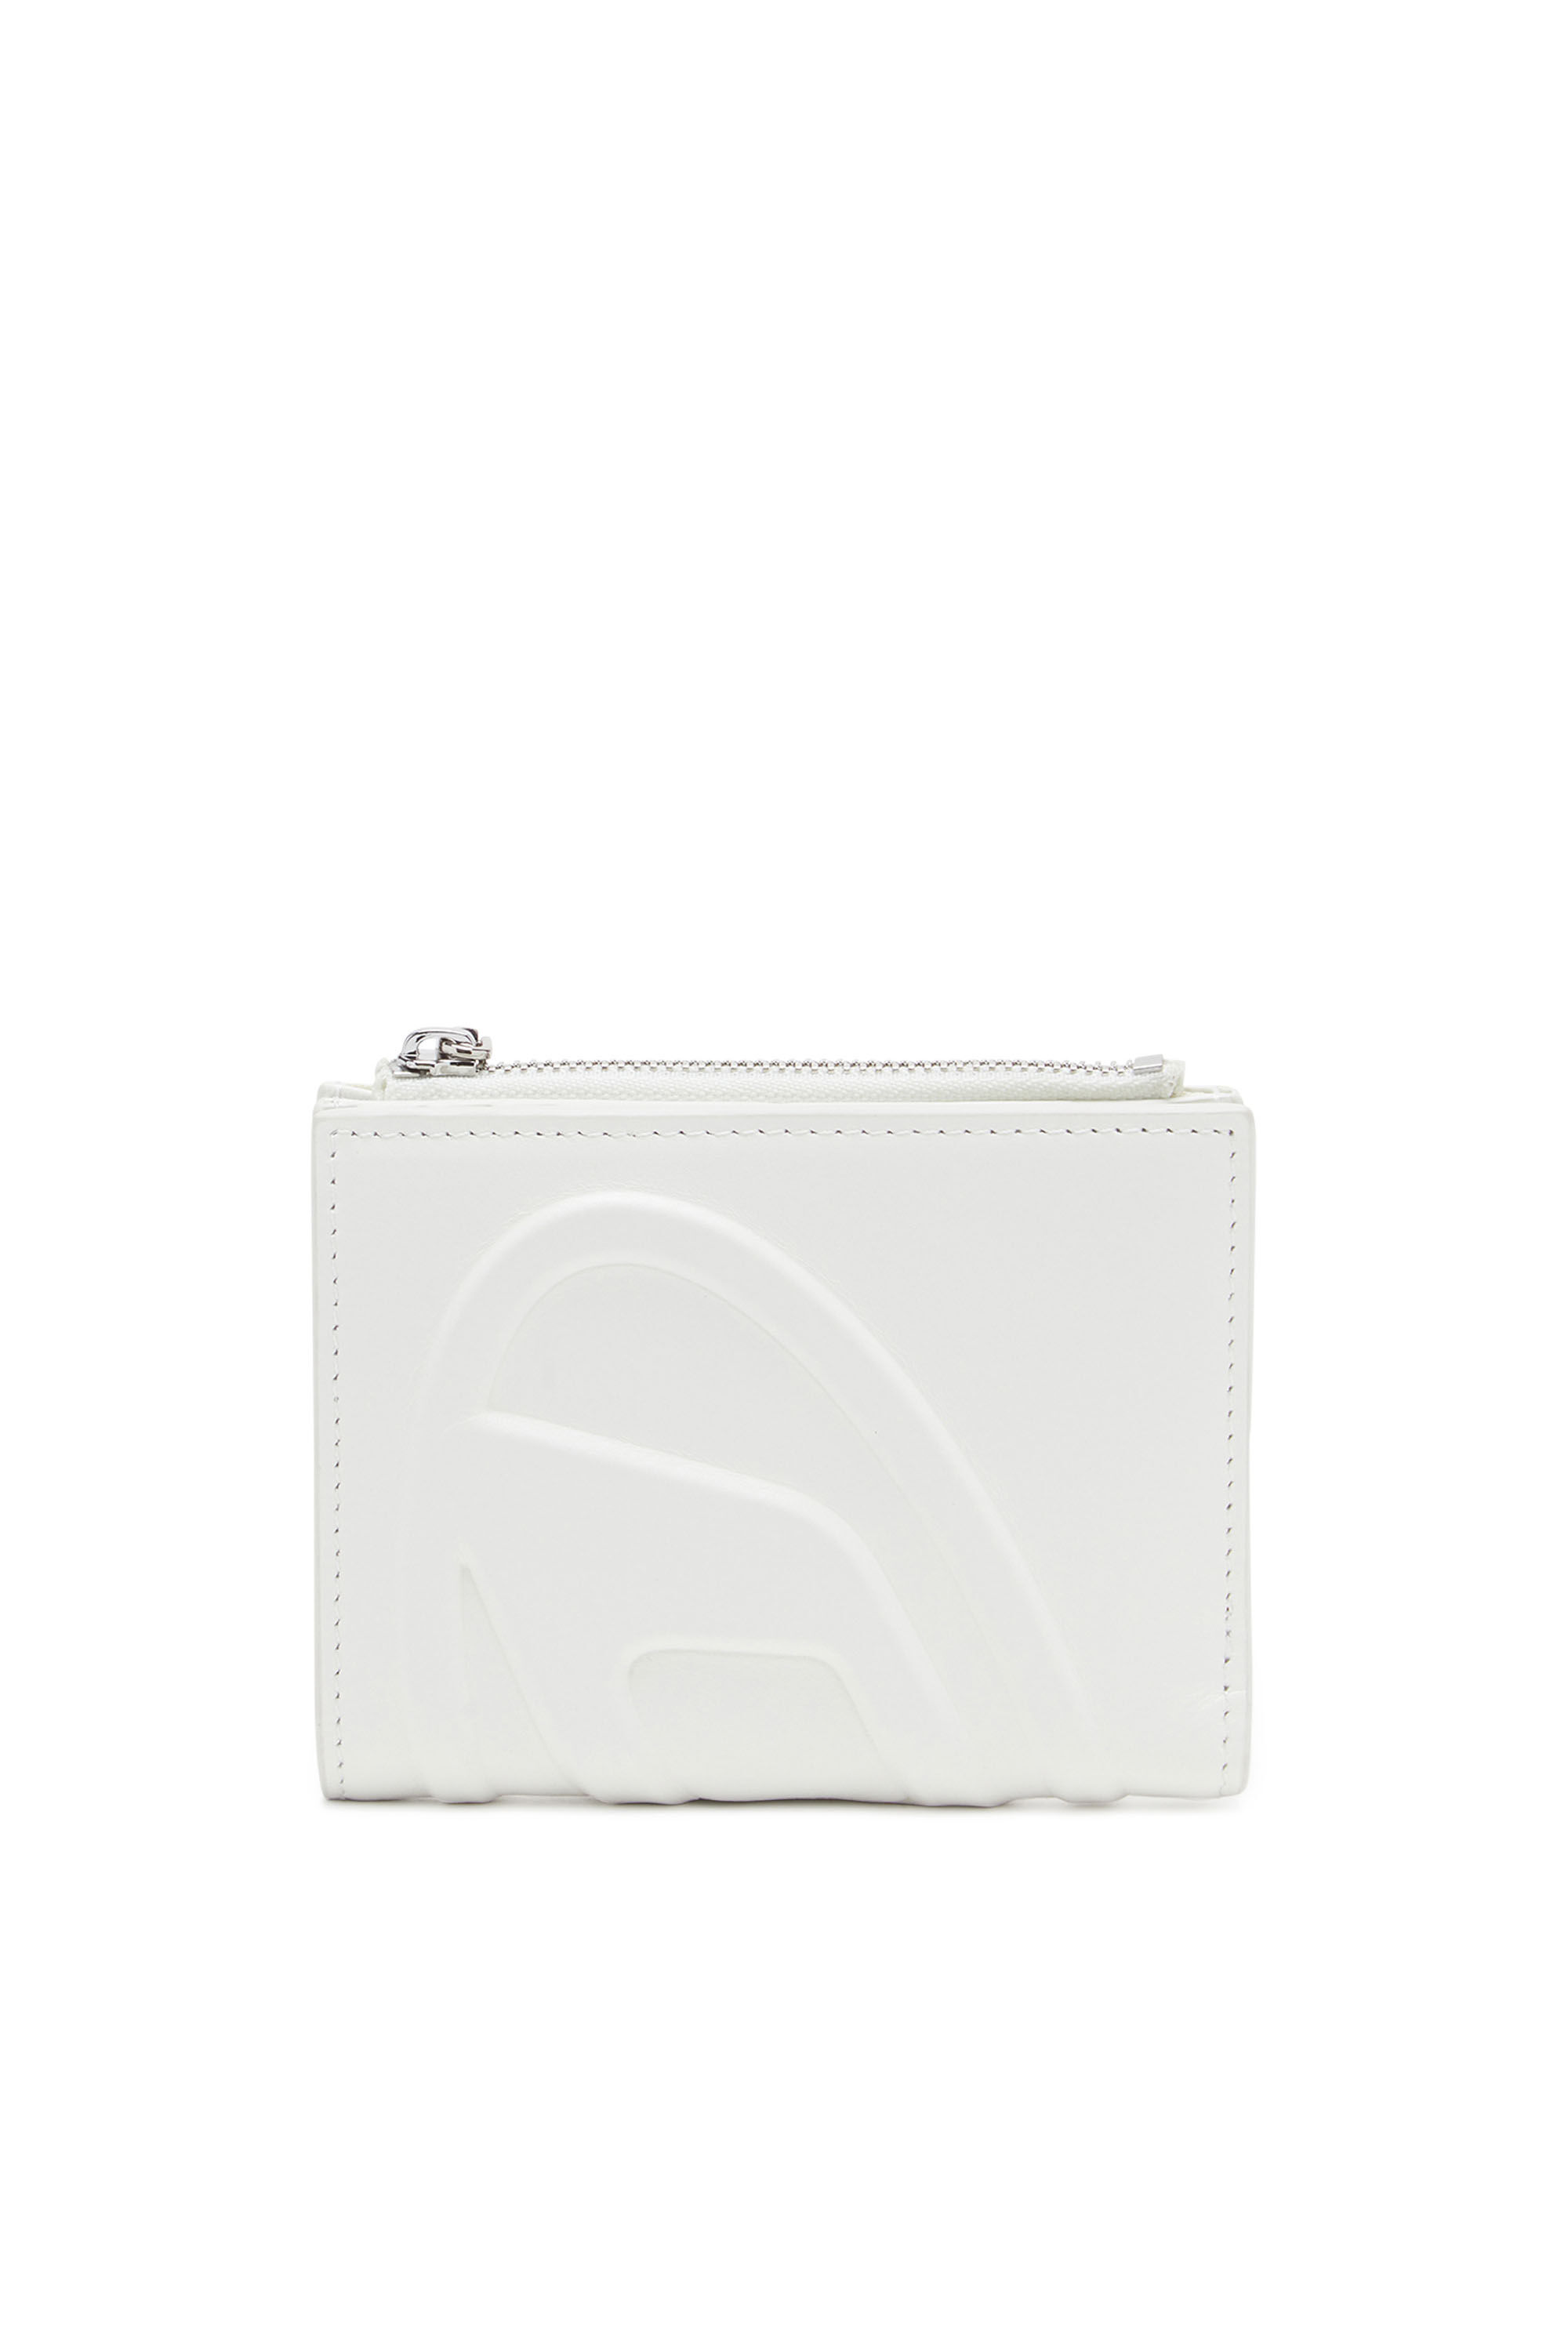 Women's Small leather wallet with embossed logo | White | Diesel